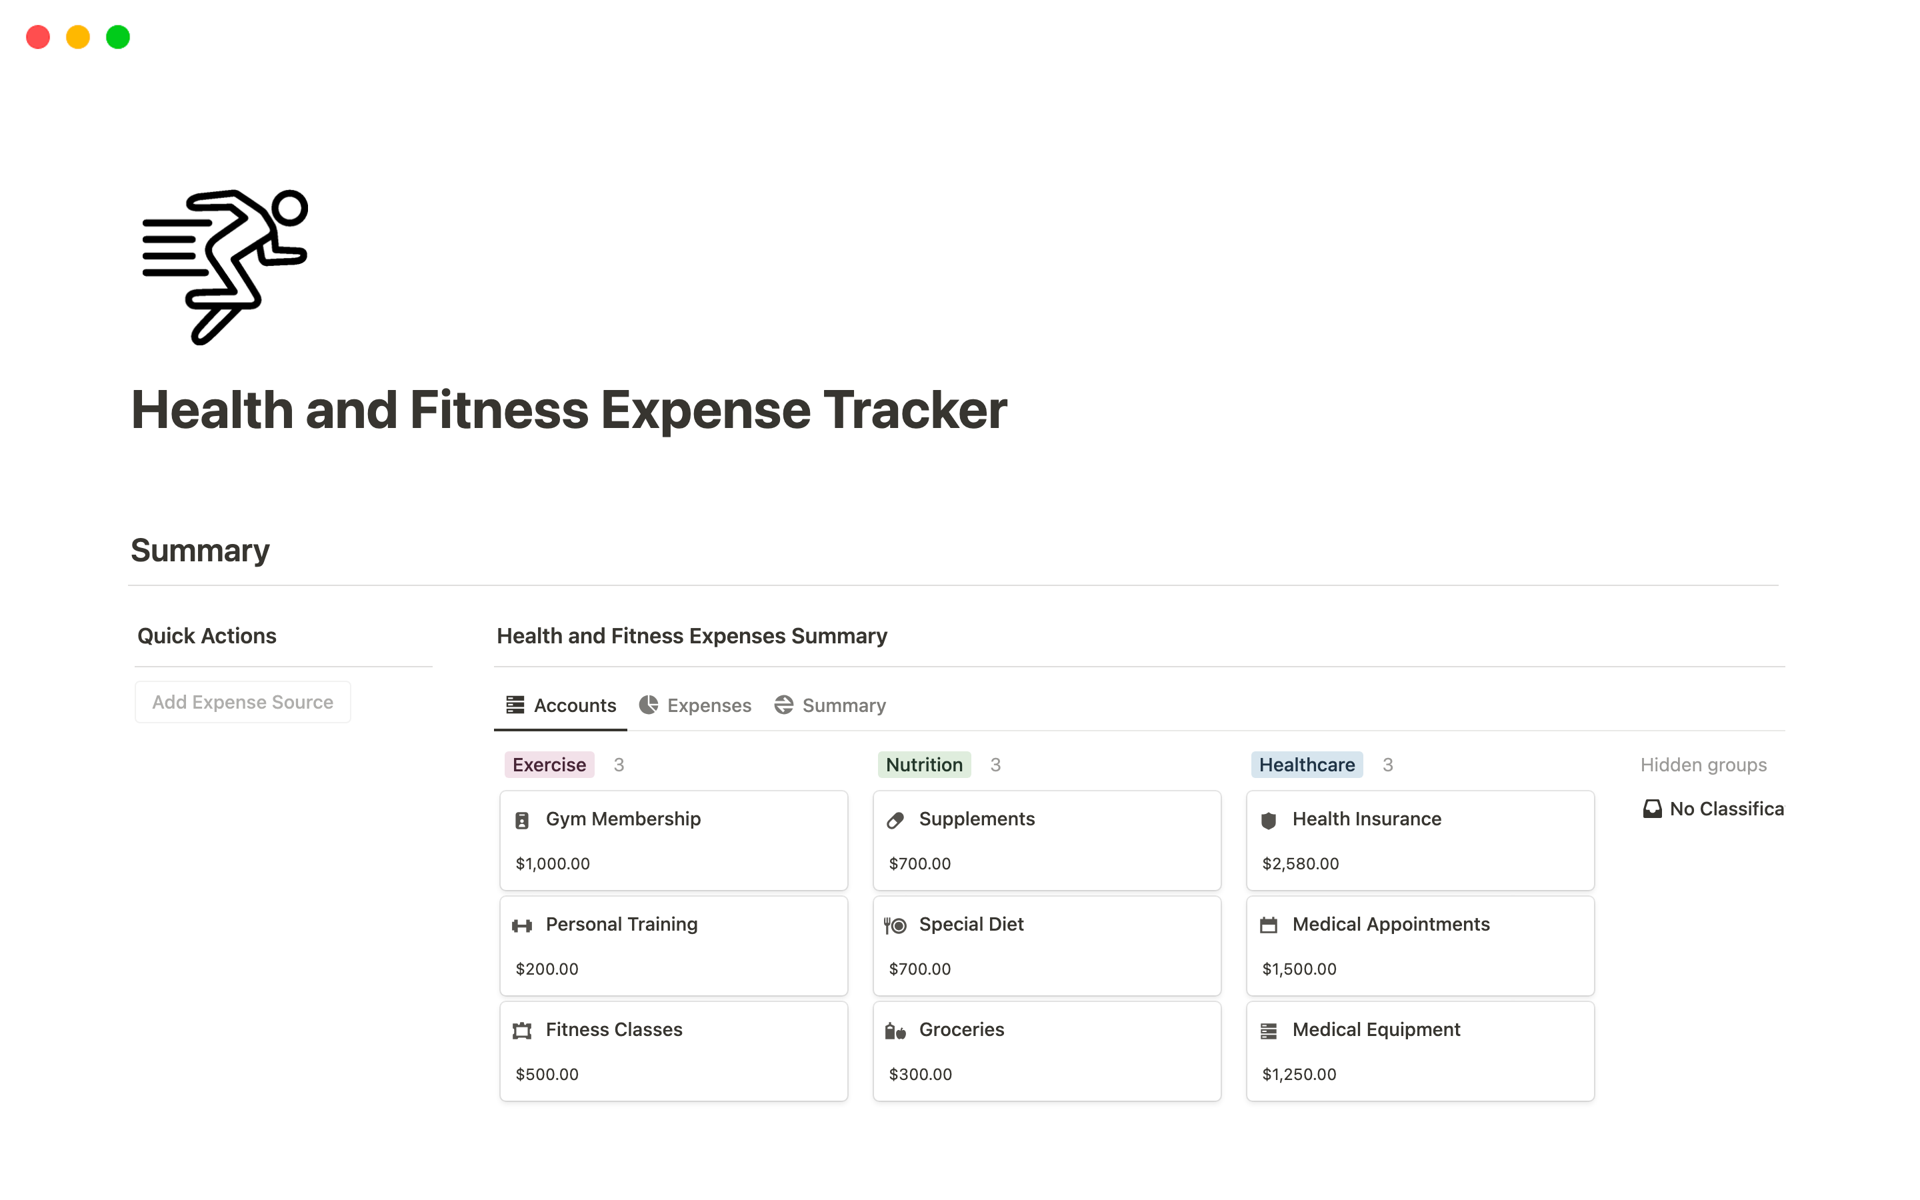 This template helps keep track of expenses related to gym memberships, fitness equipment, supplements, and healthcare costs, promoting a healthier lifestyle within budget.